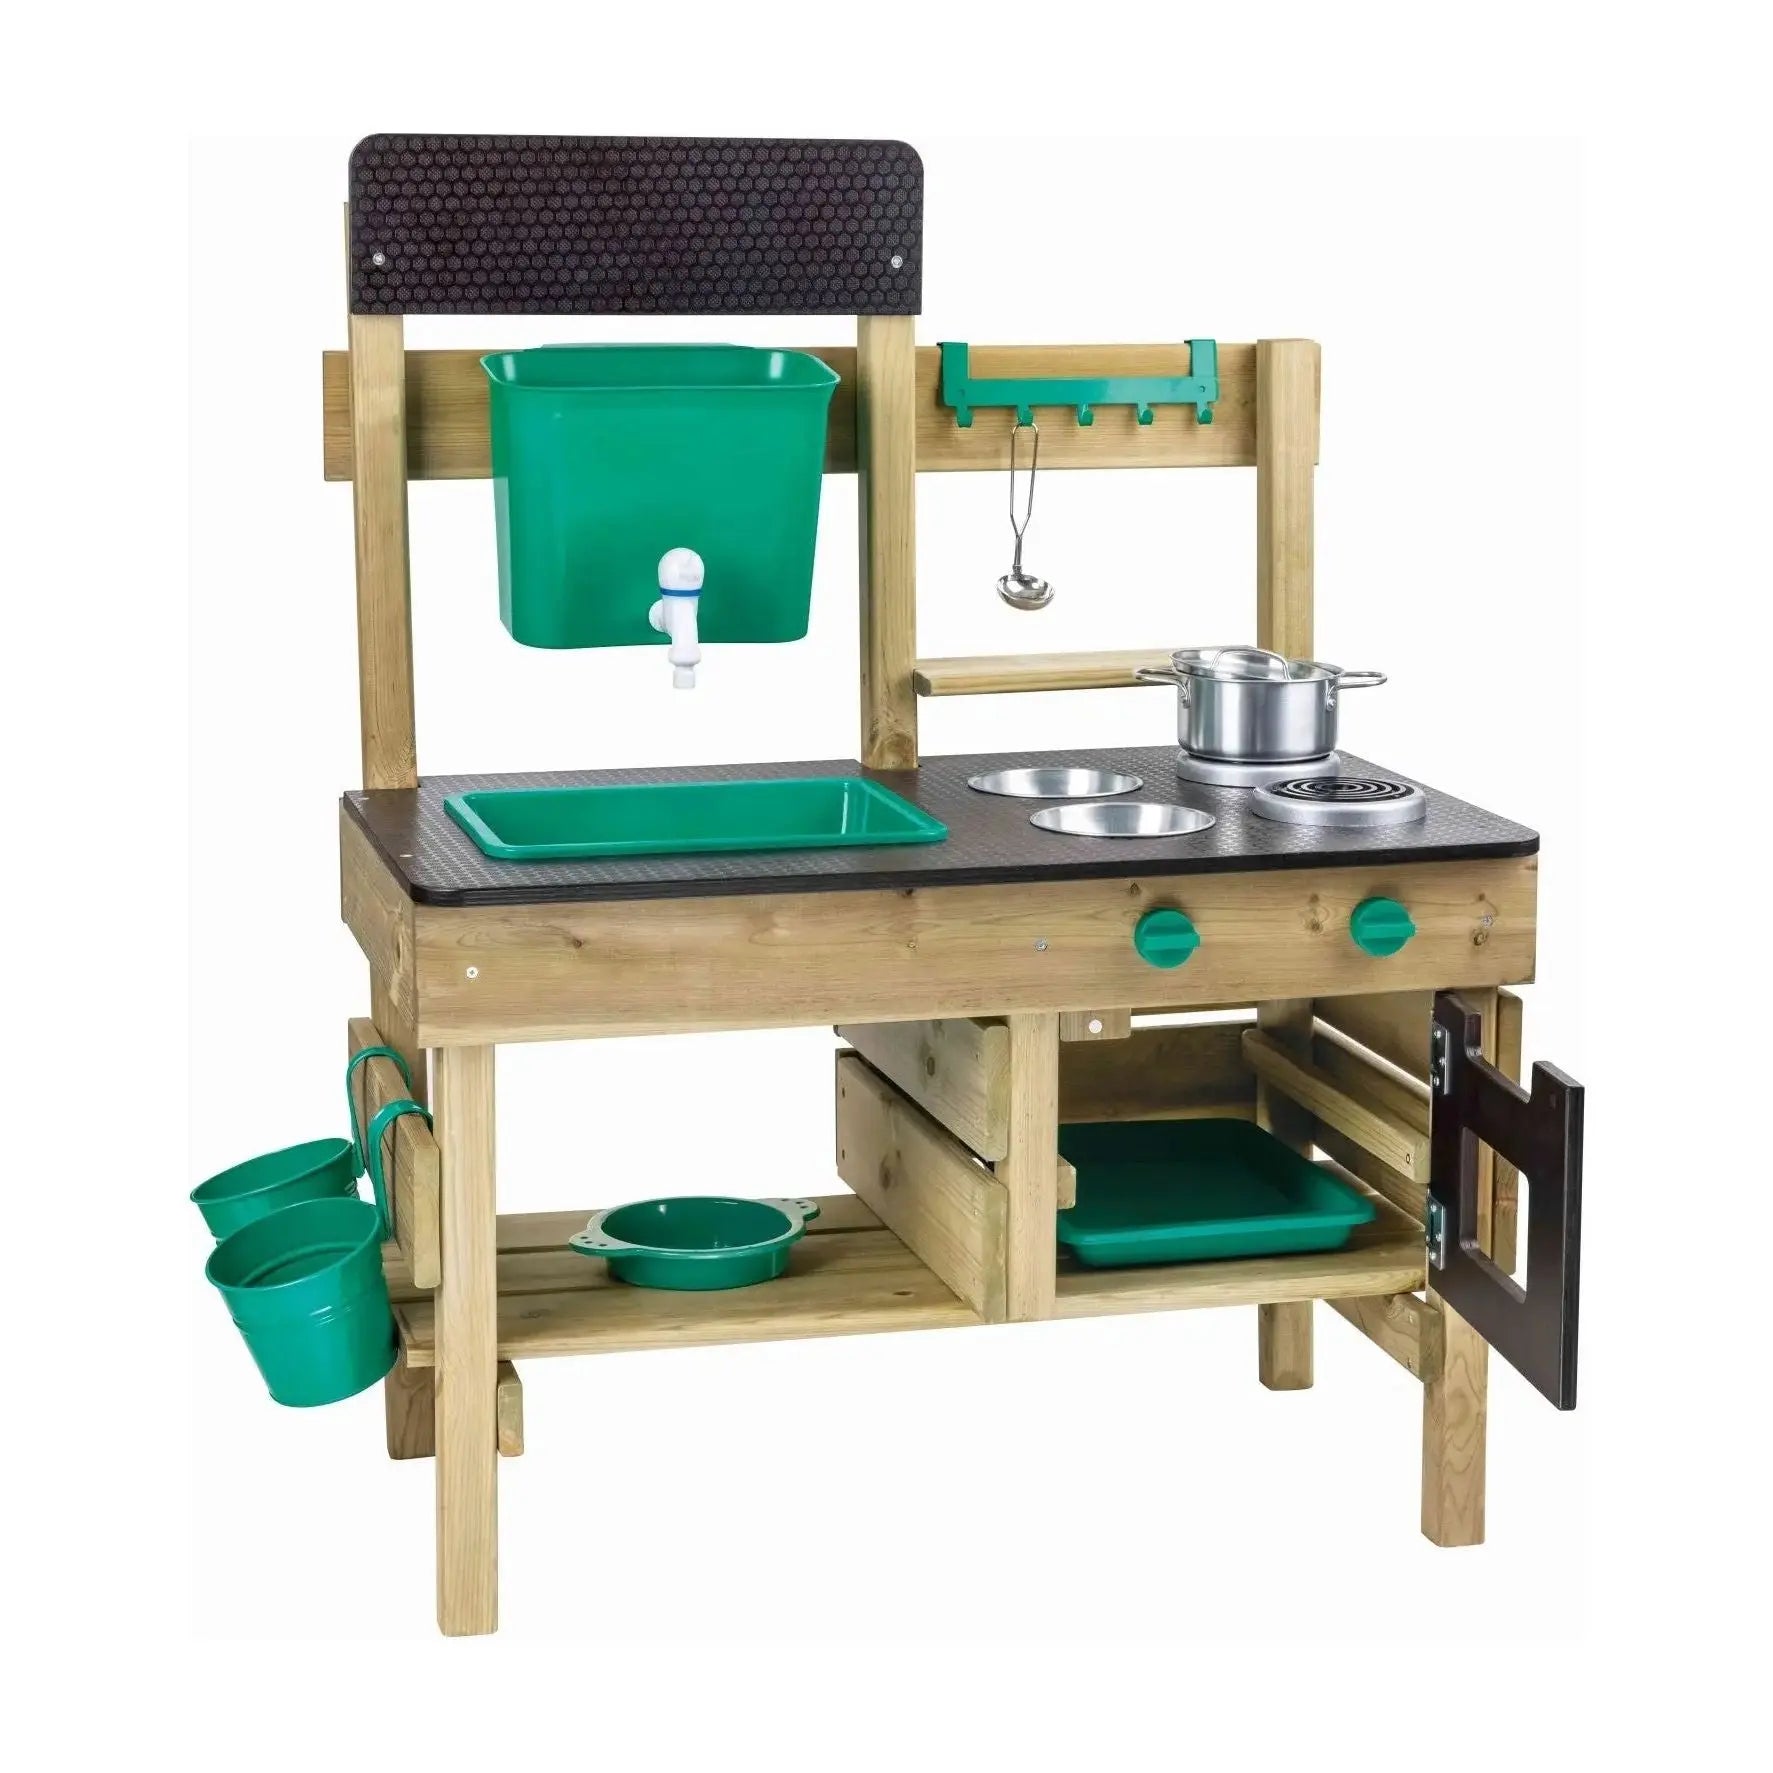 http://toys.hape.com/cdn/shop/files/Hape-Outdoor-Kitchen-_-Mud-Kitchen-Wooden-Toy-Playset-With-Accessories-Hape-Toy-Market-44390583.jpg?v=1698561516